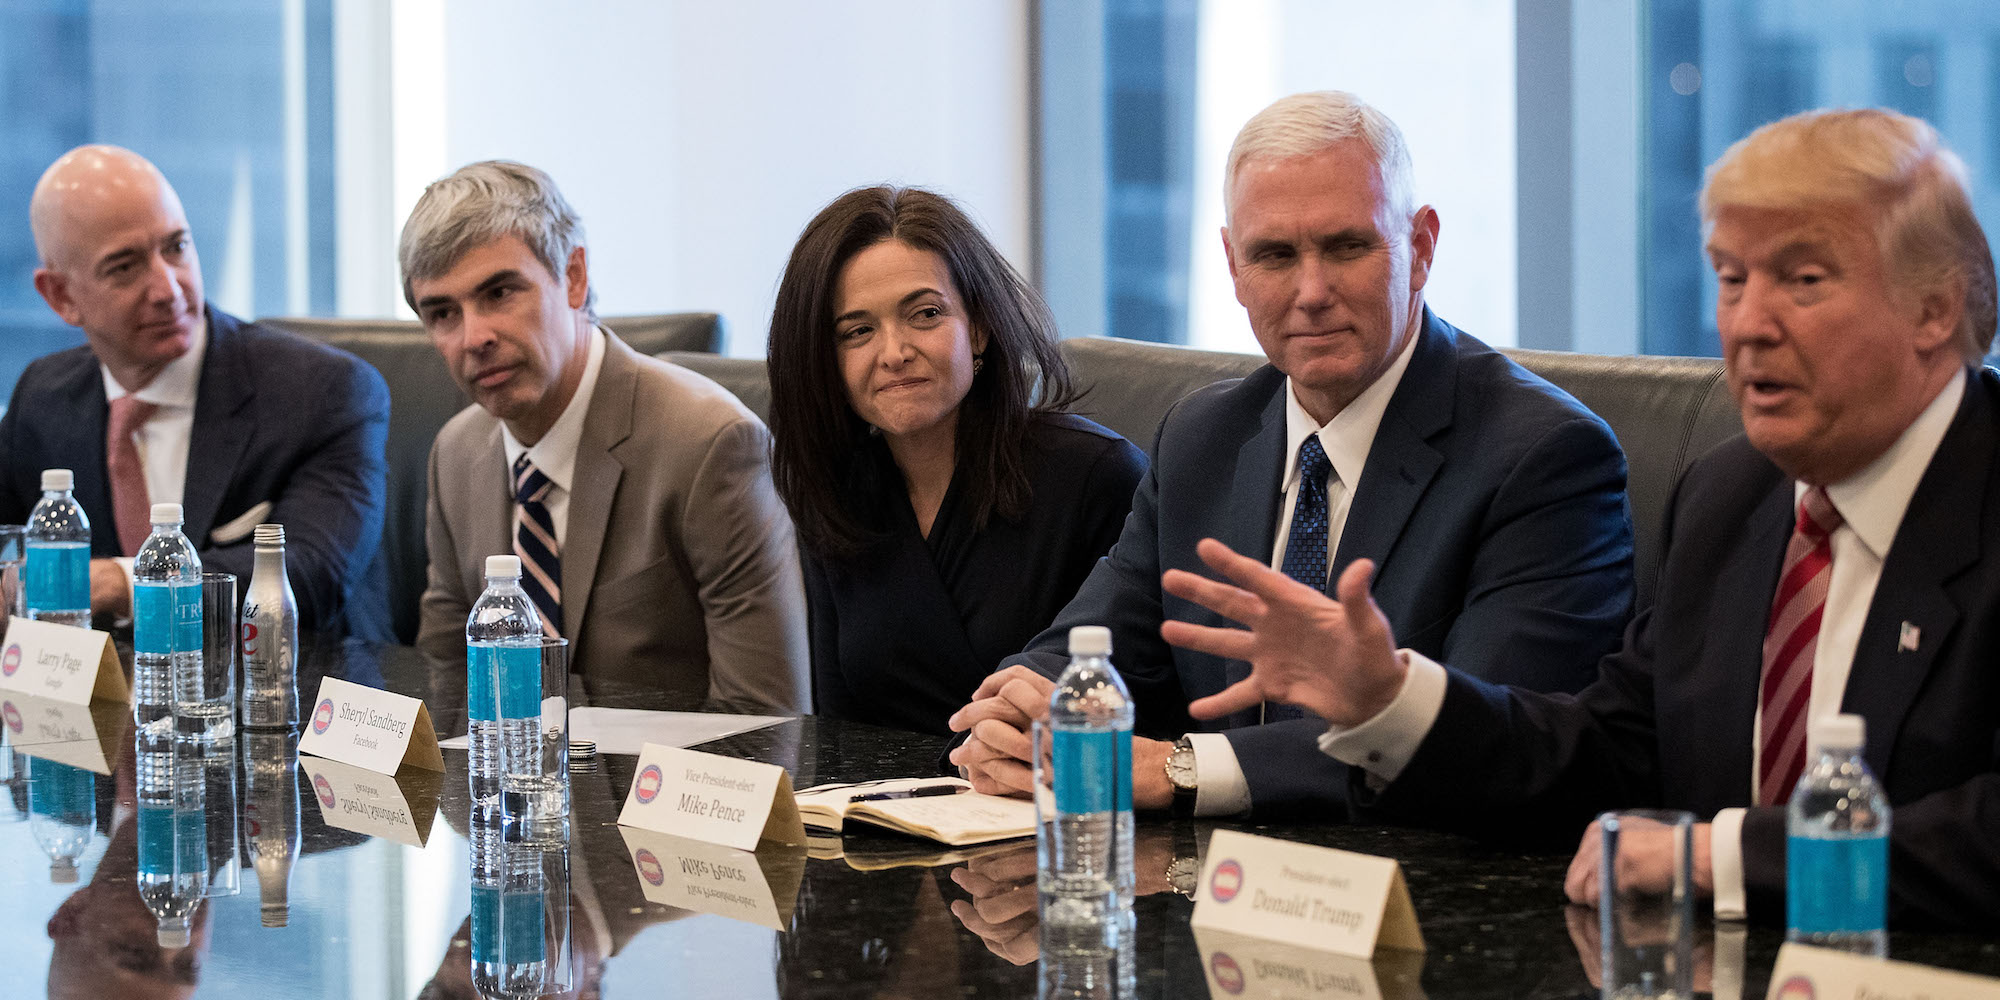 NEW YORK, NY - DECEMBER 14: (L to R) Jeff Bezos, chief executive officer of Amazon, Larry Page, chief executive officer of Alphabet Inc. (parent company of Google), Sheryl Sandberg, chief operating officer of Facebook, Vice President-elect Mike Pence listen as President-elect Donald Trump speaks during a meeting of technology executives at Trump Tower, December 14, 2016 in New York City. This is the first major meeting between President-elect Trump and technology industry leaders. (Photo by Drew Angerer/Getty Images)